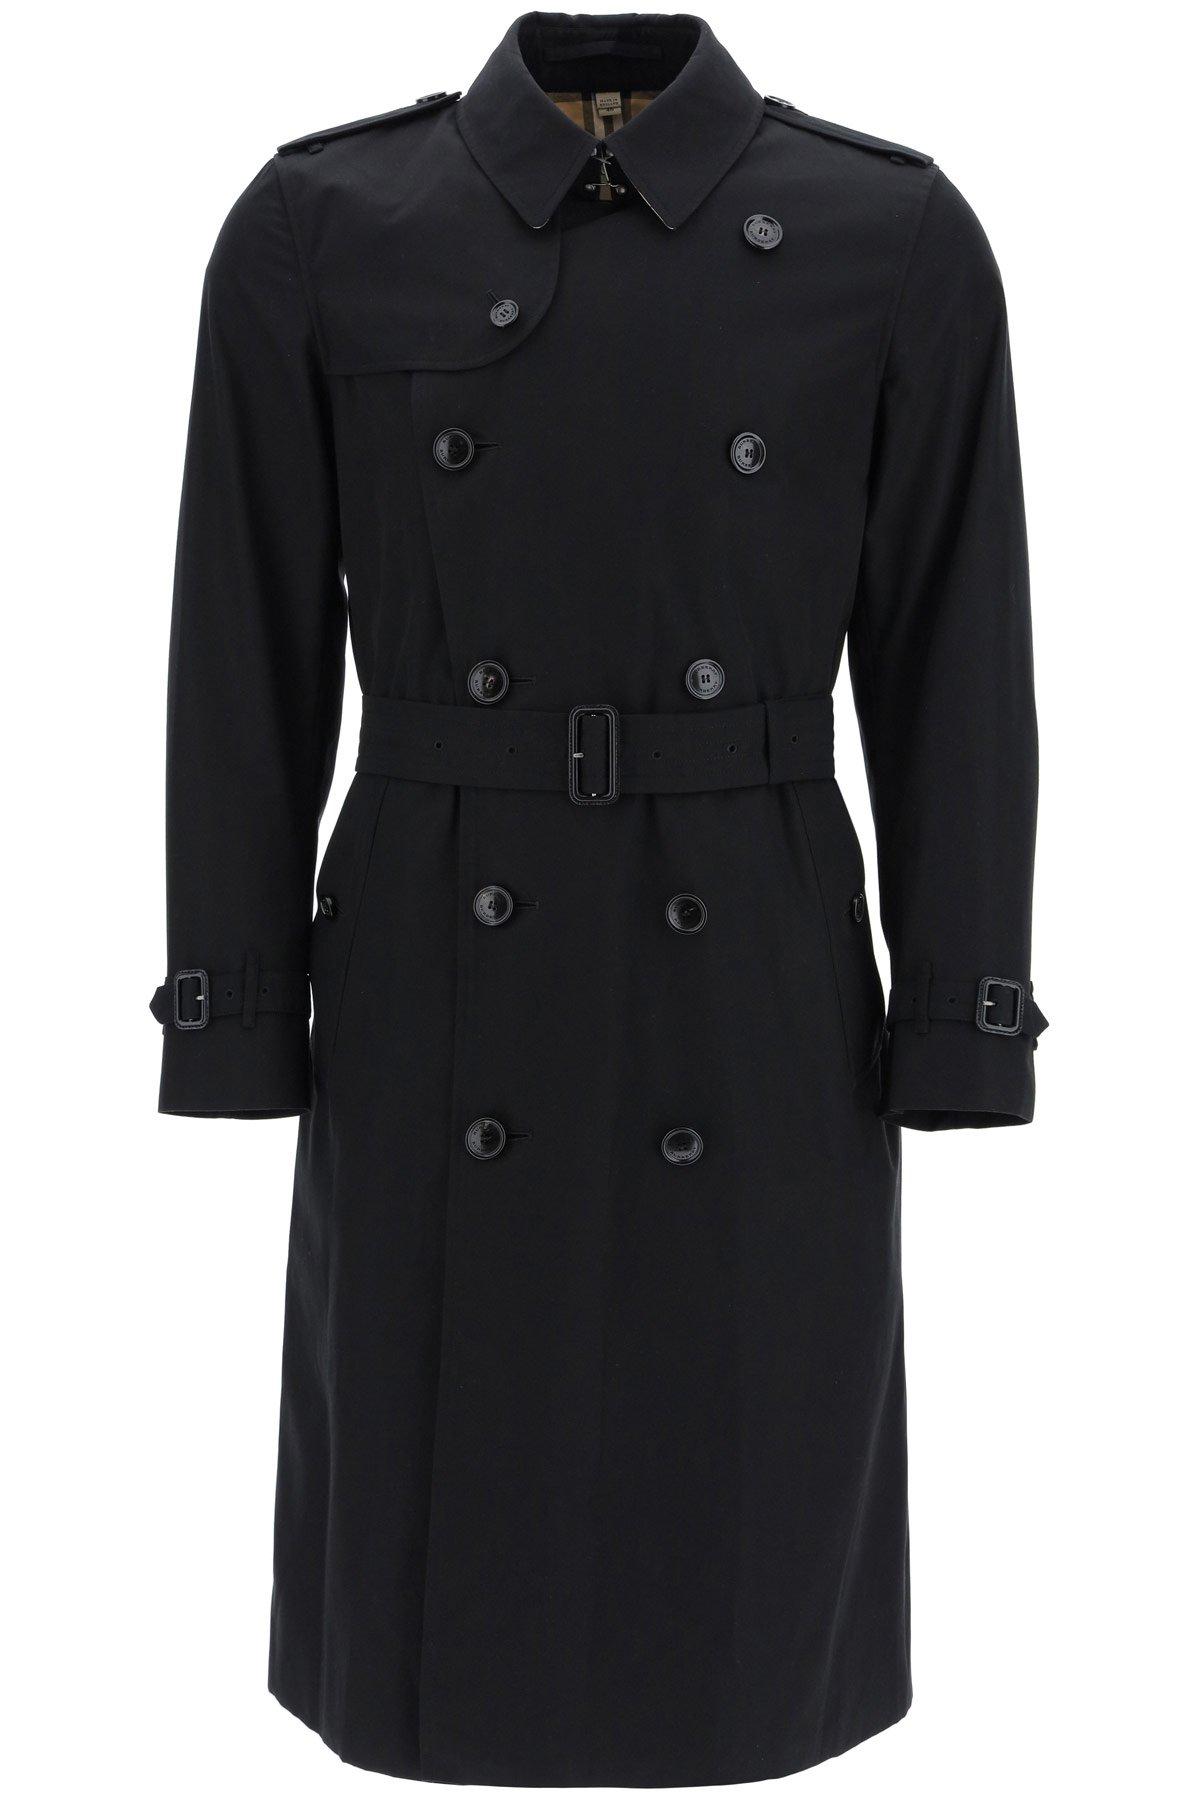 Burberry Cotton The Long Kensington Heritage Trench Coat in 46 (Black ...